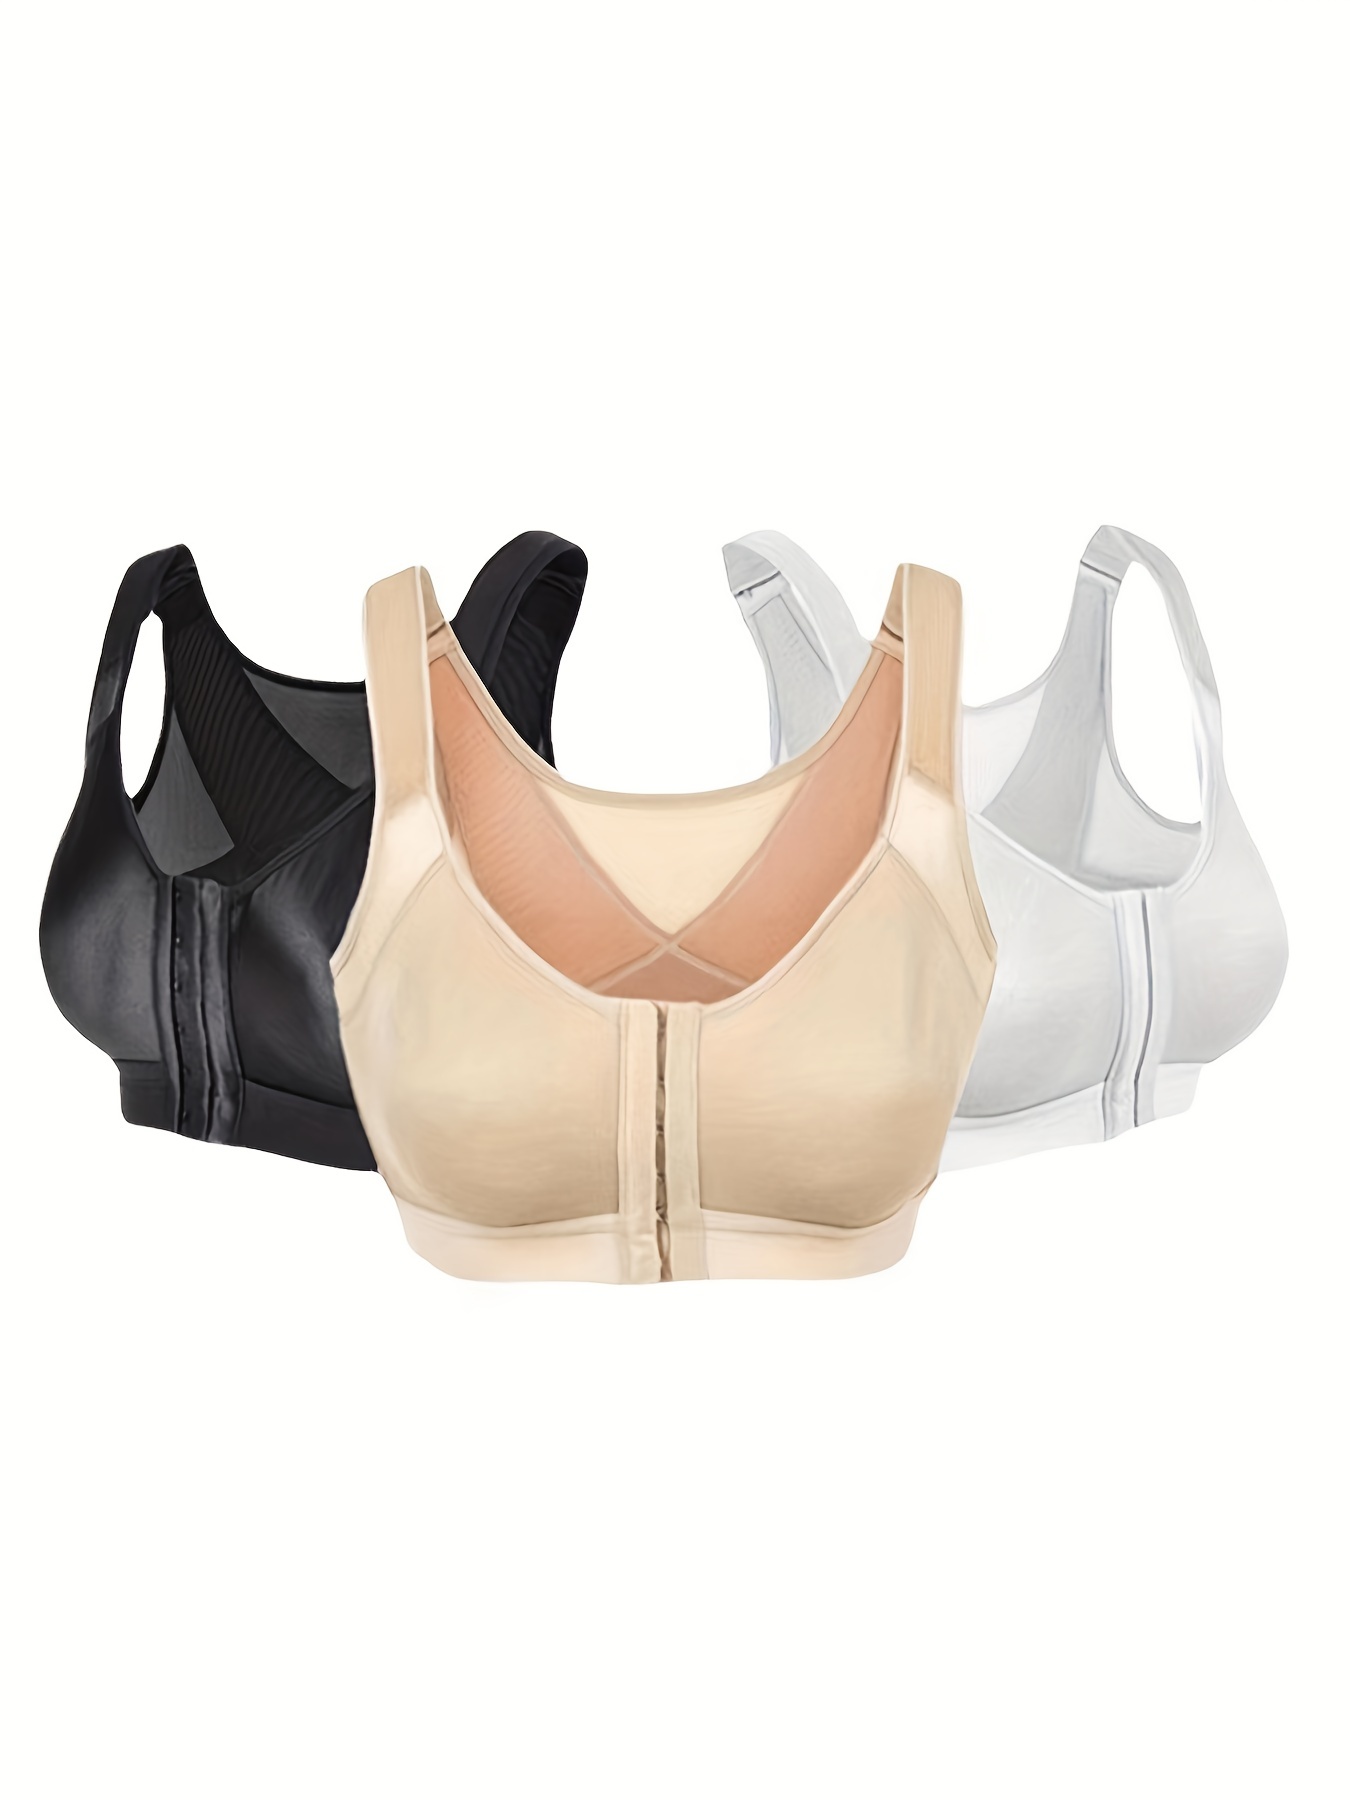 Pregnant Women's Nursing Bras, Seamless Supportive Breastfeeding Slightly  Stretch Comfy Maternity Bra For Daily Comfort Open Front Button